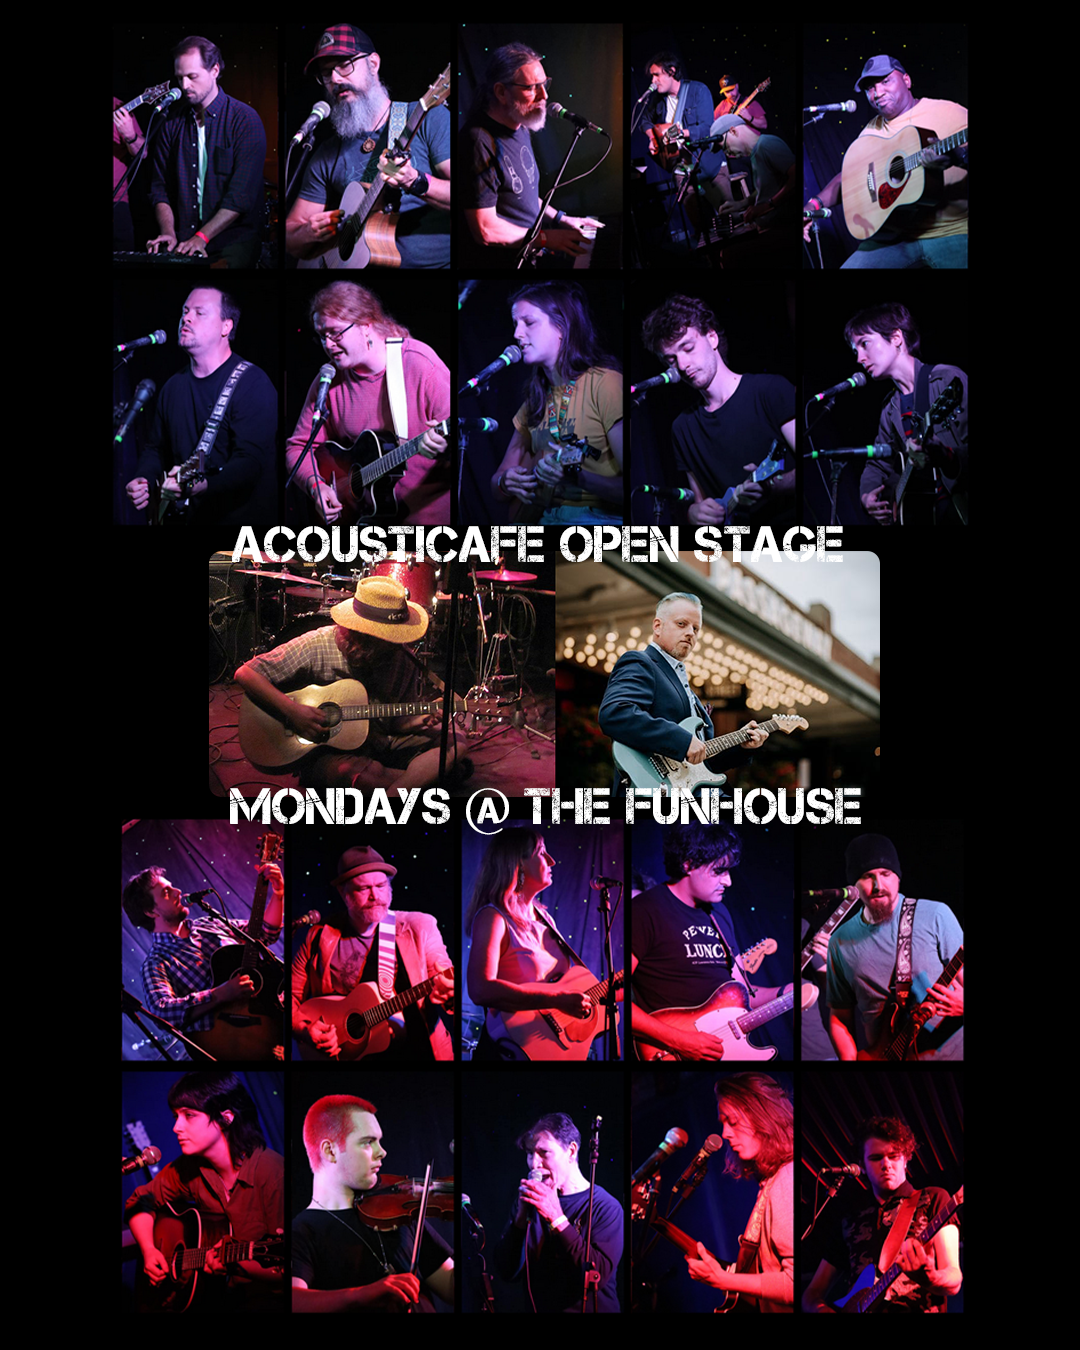 AcoustiCafe Open Stage every Monday at The Funhouse at Mr Smalls